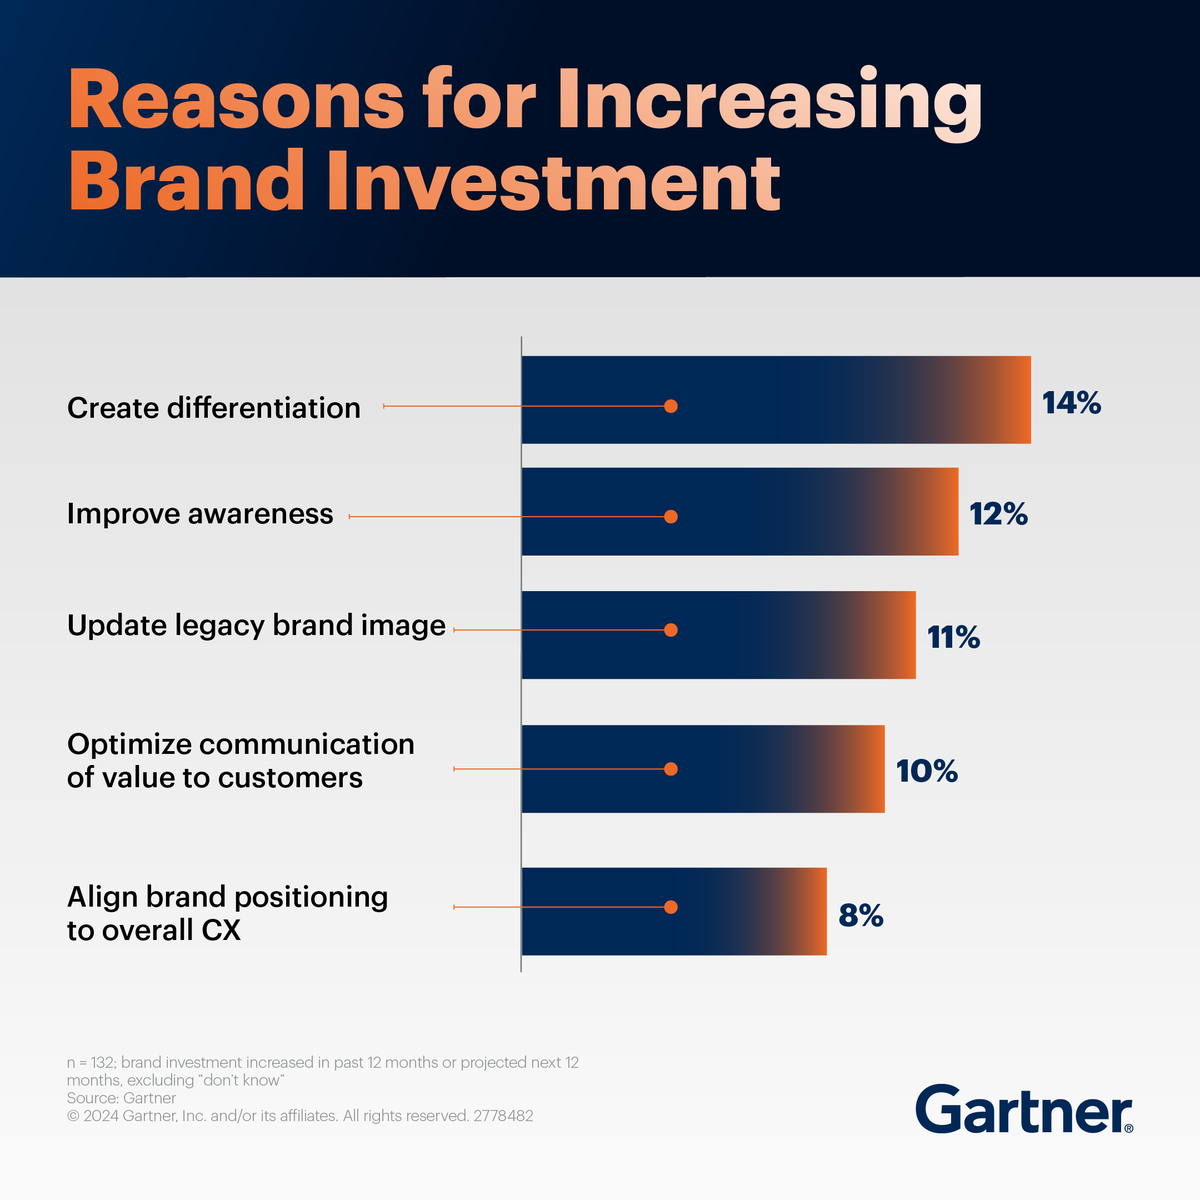 Tech CMOs are often faced with evaluating current brand architecture and positioning for several reasons, the primary of which is driving revenue growth. 

Evaluate your current brands to ensure alignment with business goals: gtnr.it/3VkyiBc

#Tech #GartnerHT #TechCMO